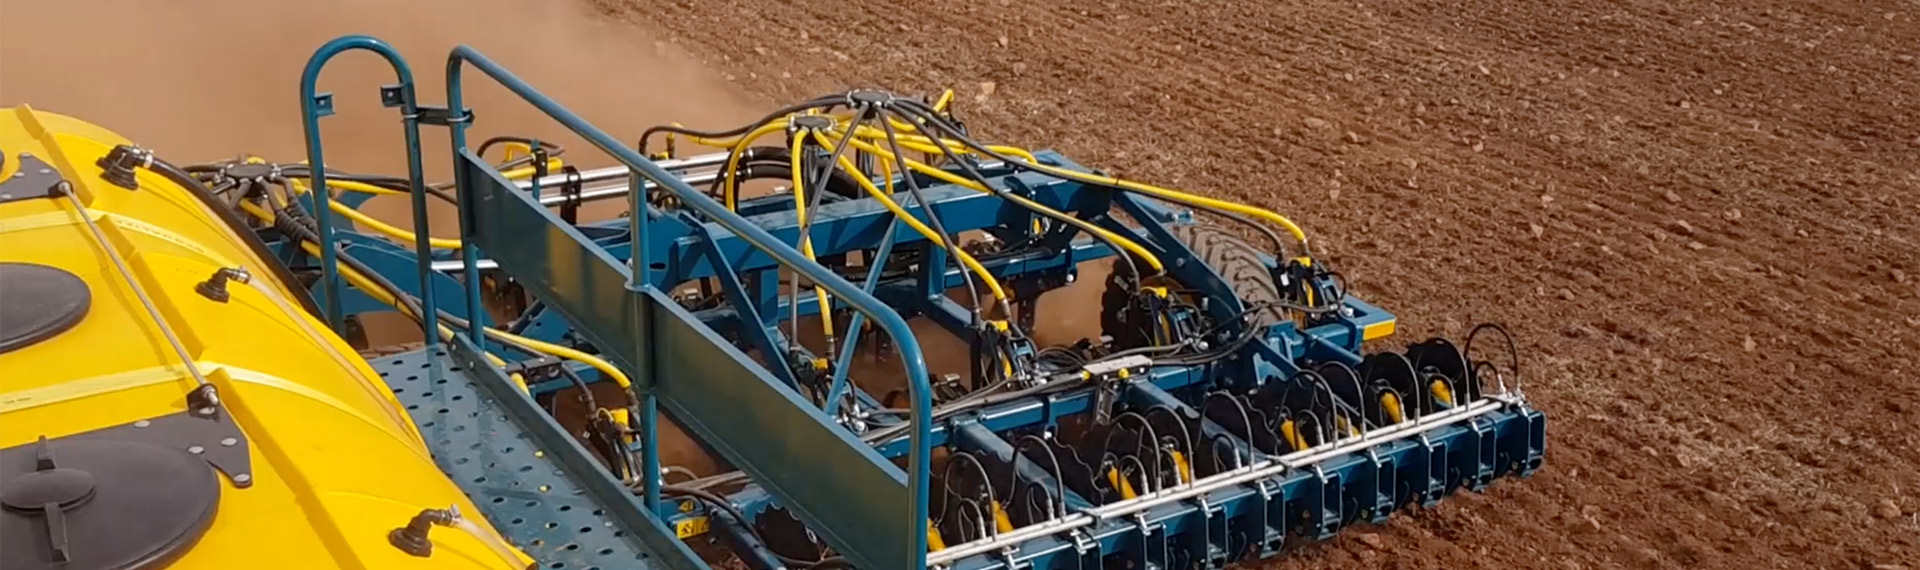 The Equalizer air seeder 